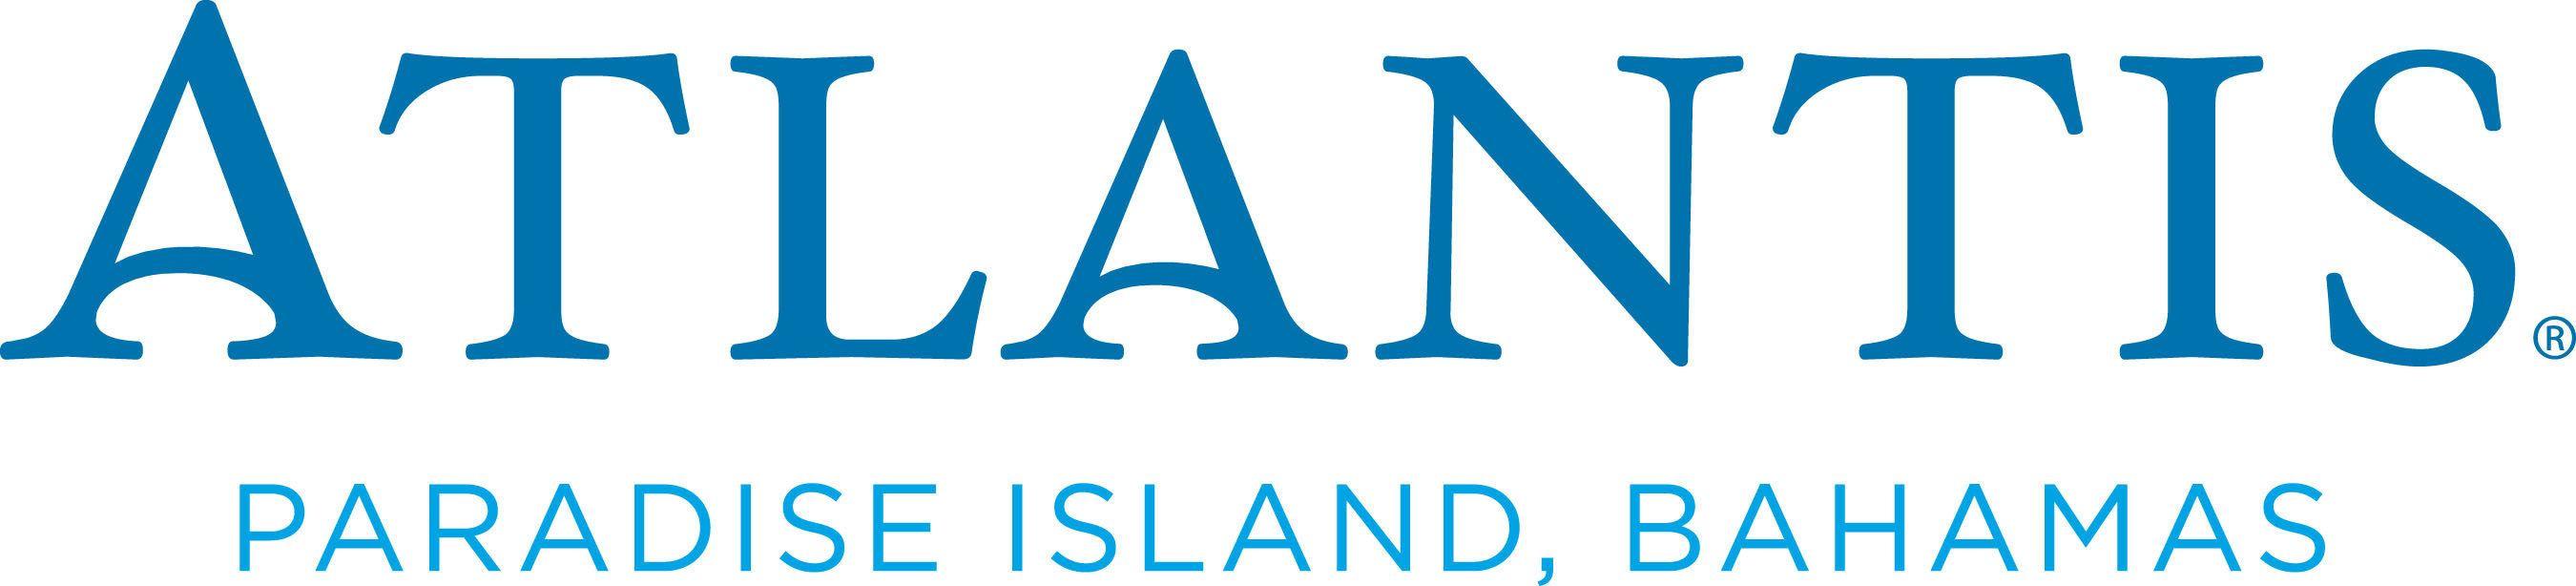 Atlantis Paradise Island Logo - Laughter In Paradise: Comedian Chelsea Handler To Perform At ...